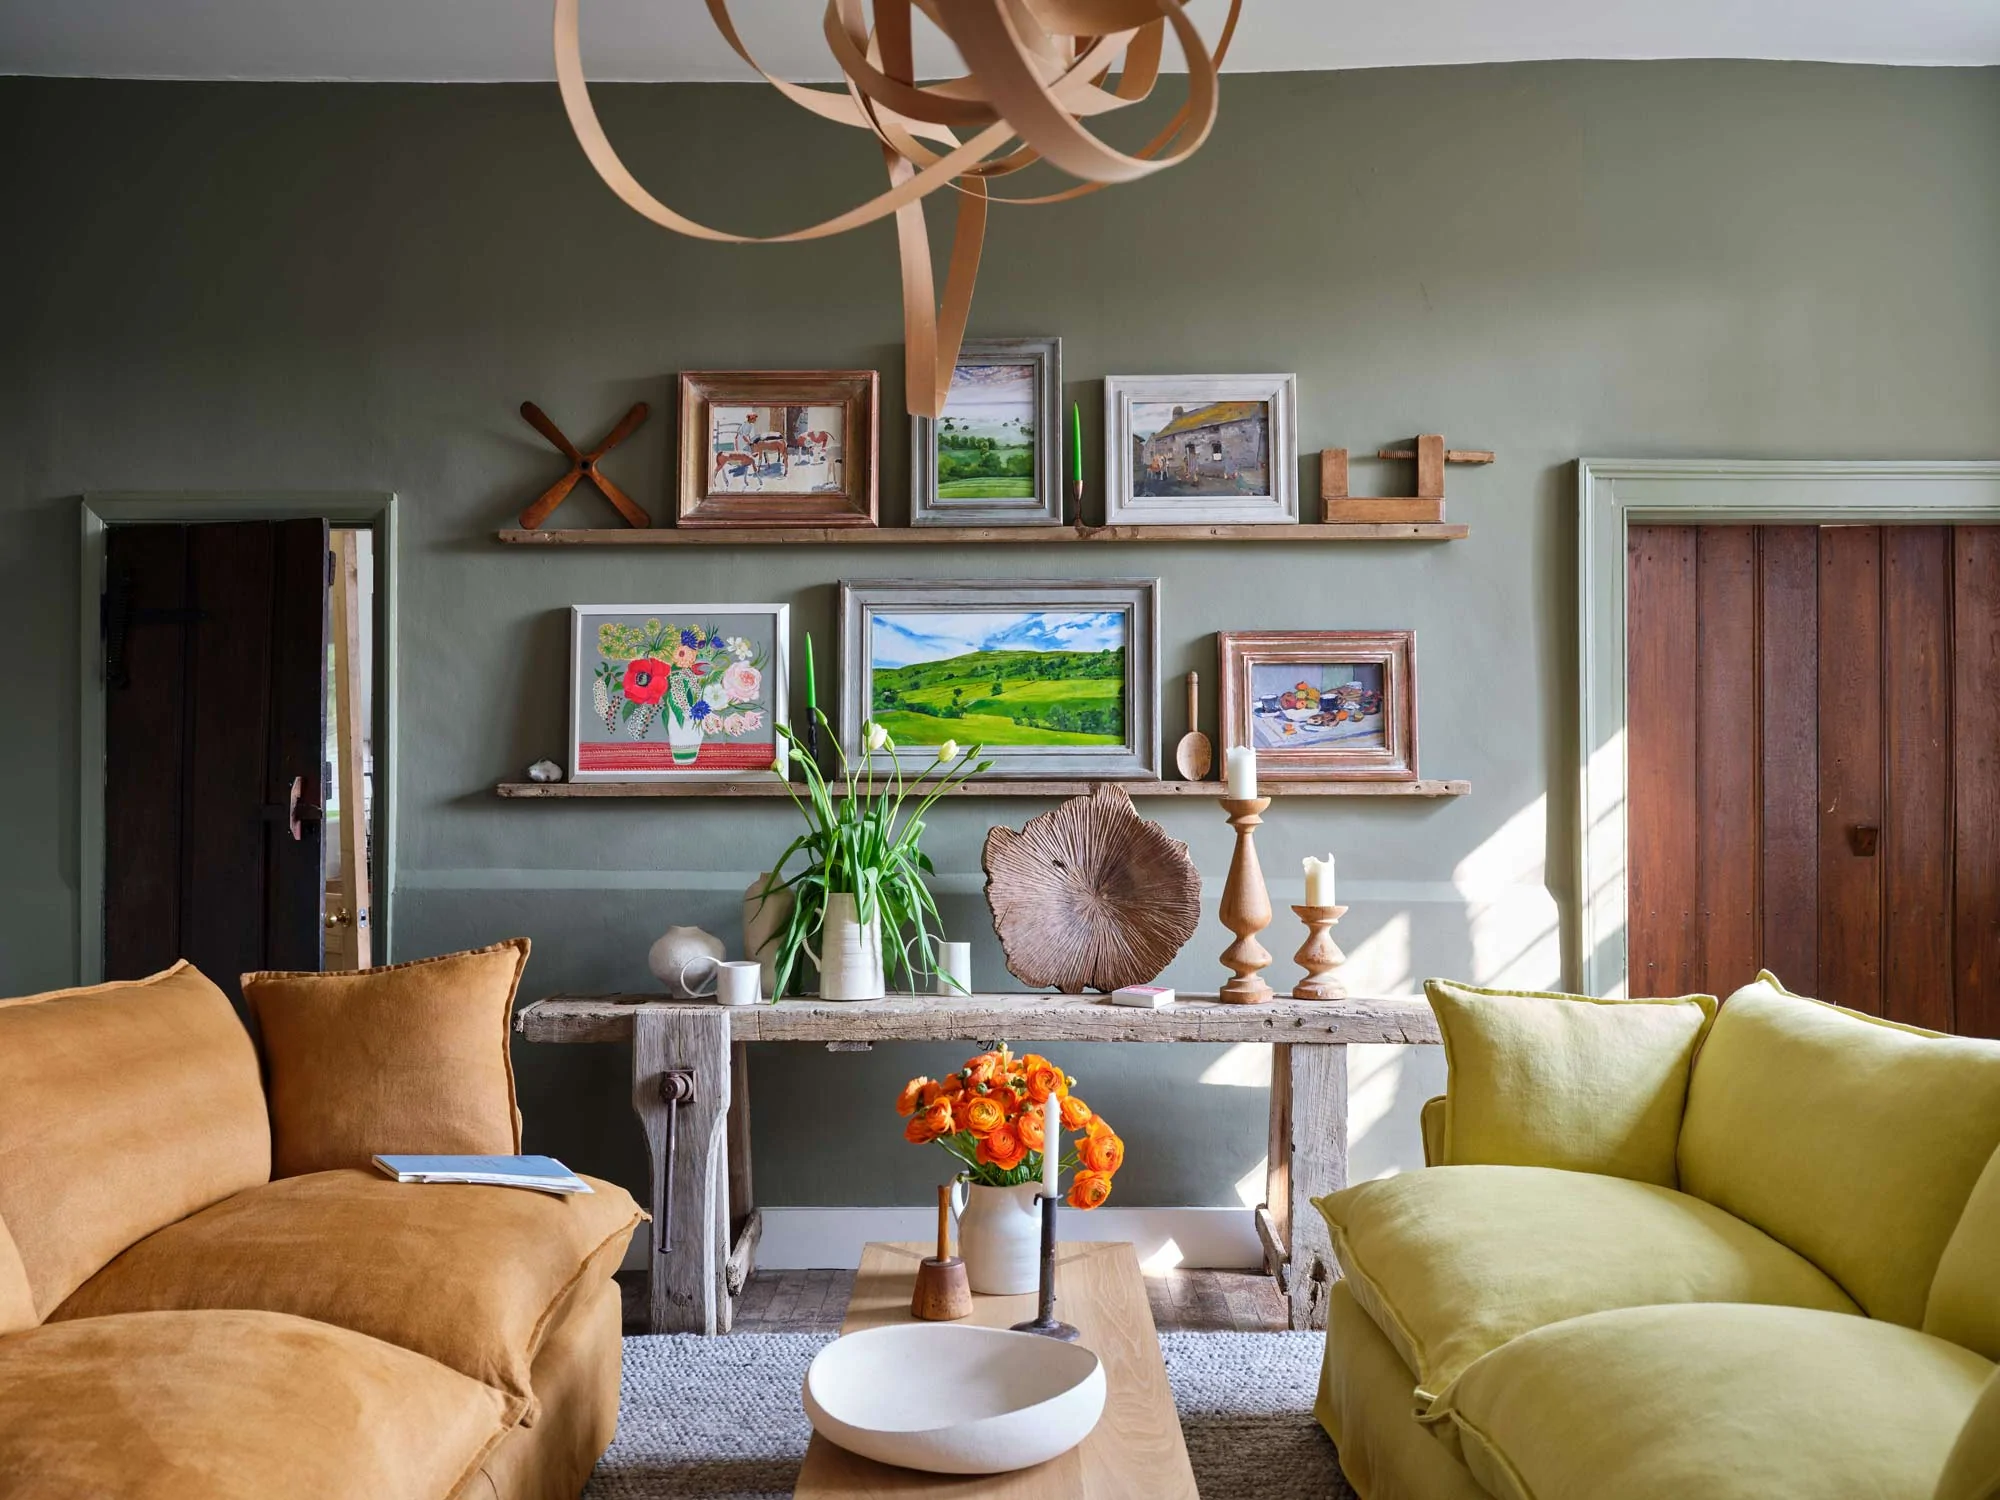 A soft, warm moss green room with a citrine yellow and brown bronzite sofa facing each other with a birch coffee table in between. The walls are covered in paintings and decorations in 3 horizontal rows. Against the wall is a rustic wooden side table with candles, a vase of white tulips and a wooden sculptural bowl.